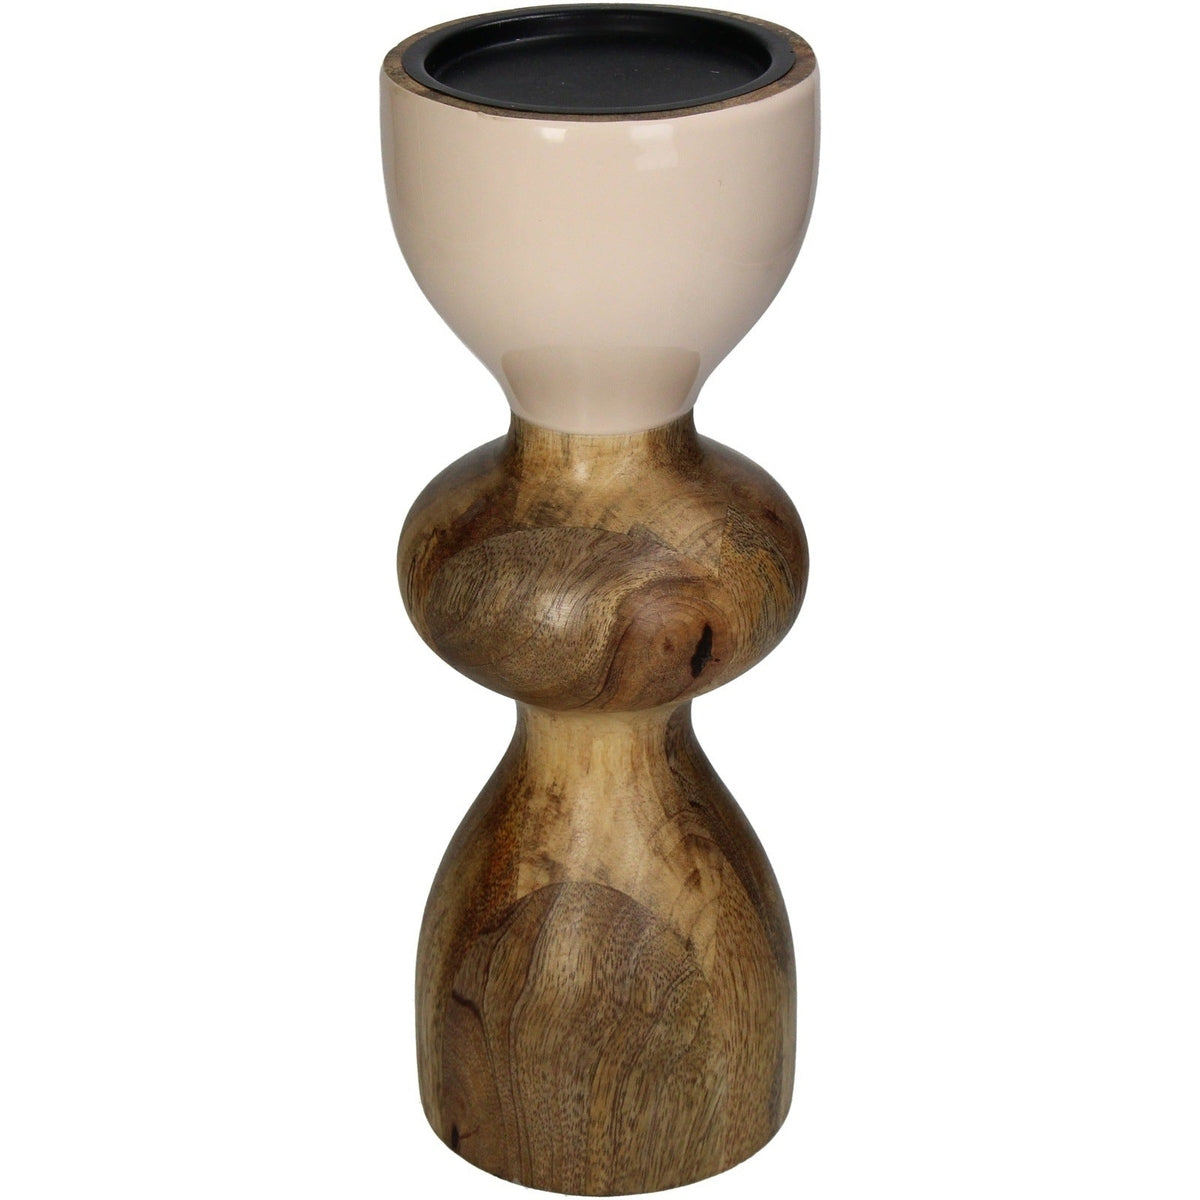 Libra Interiors Wooden Candle Holder in Biege